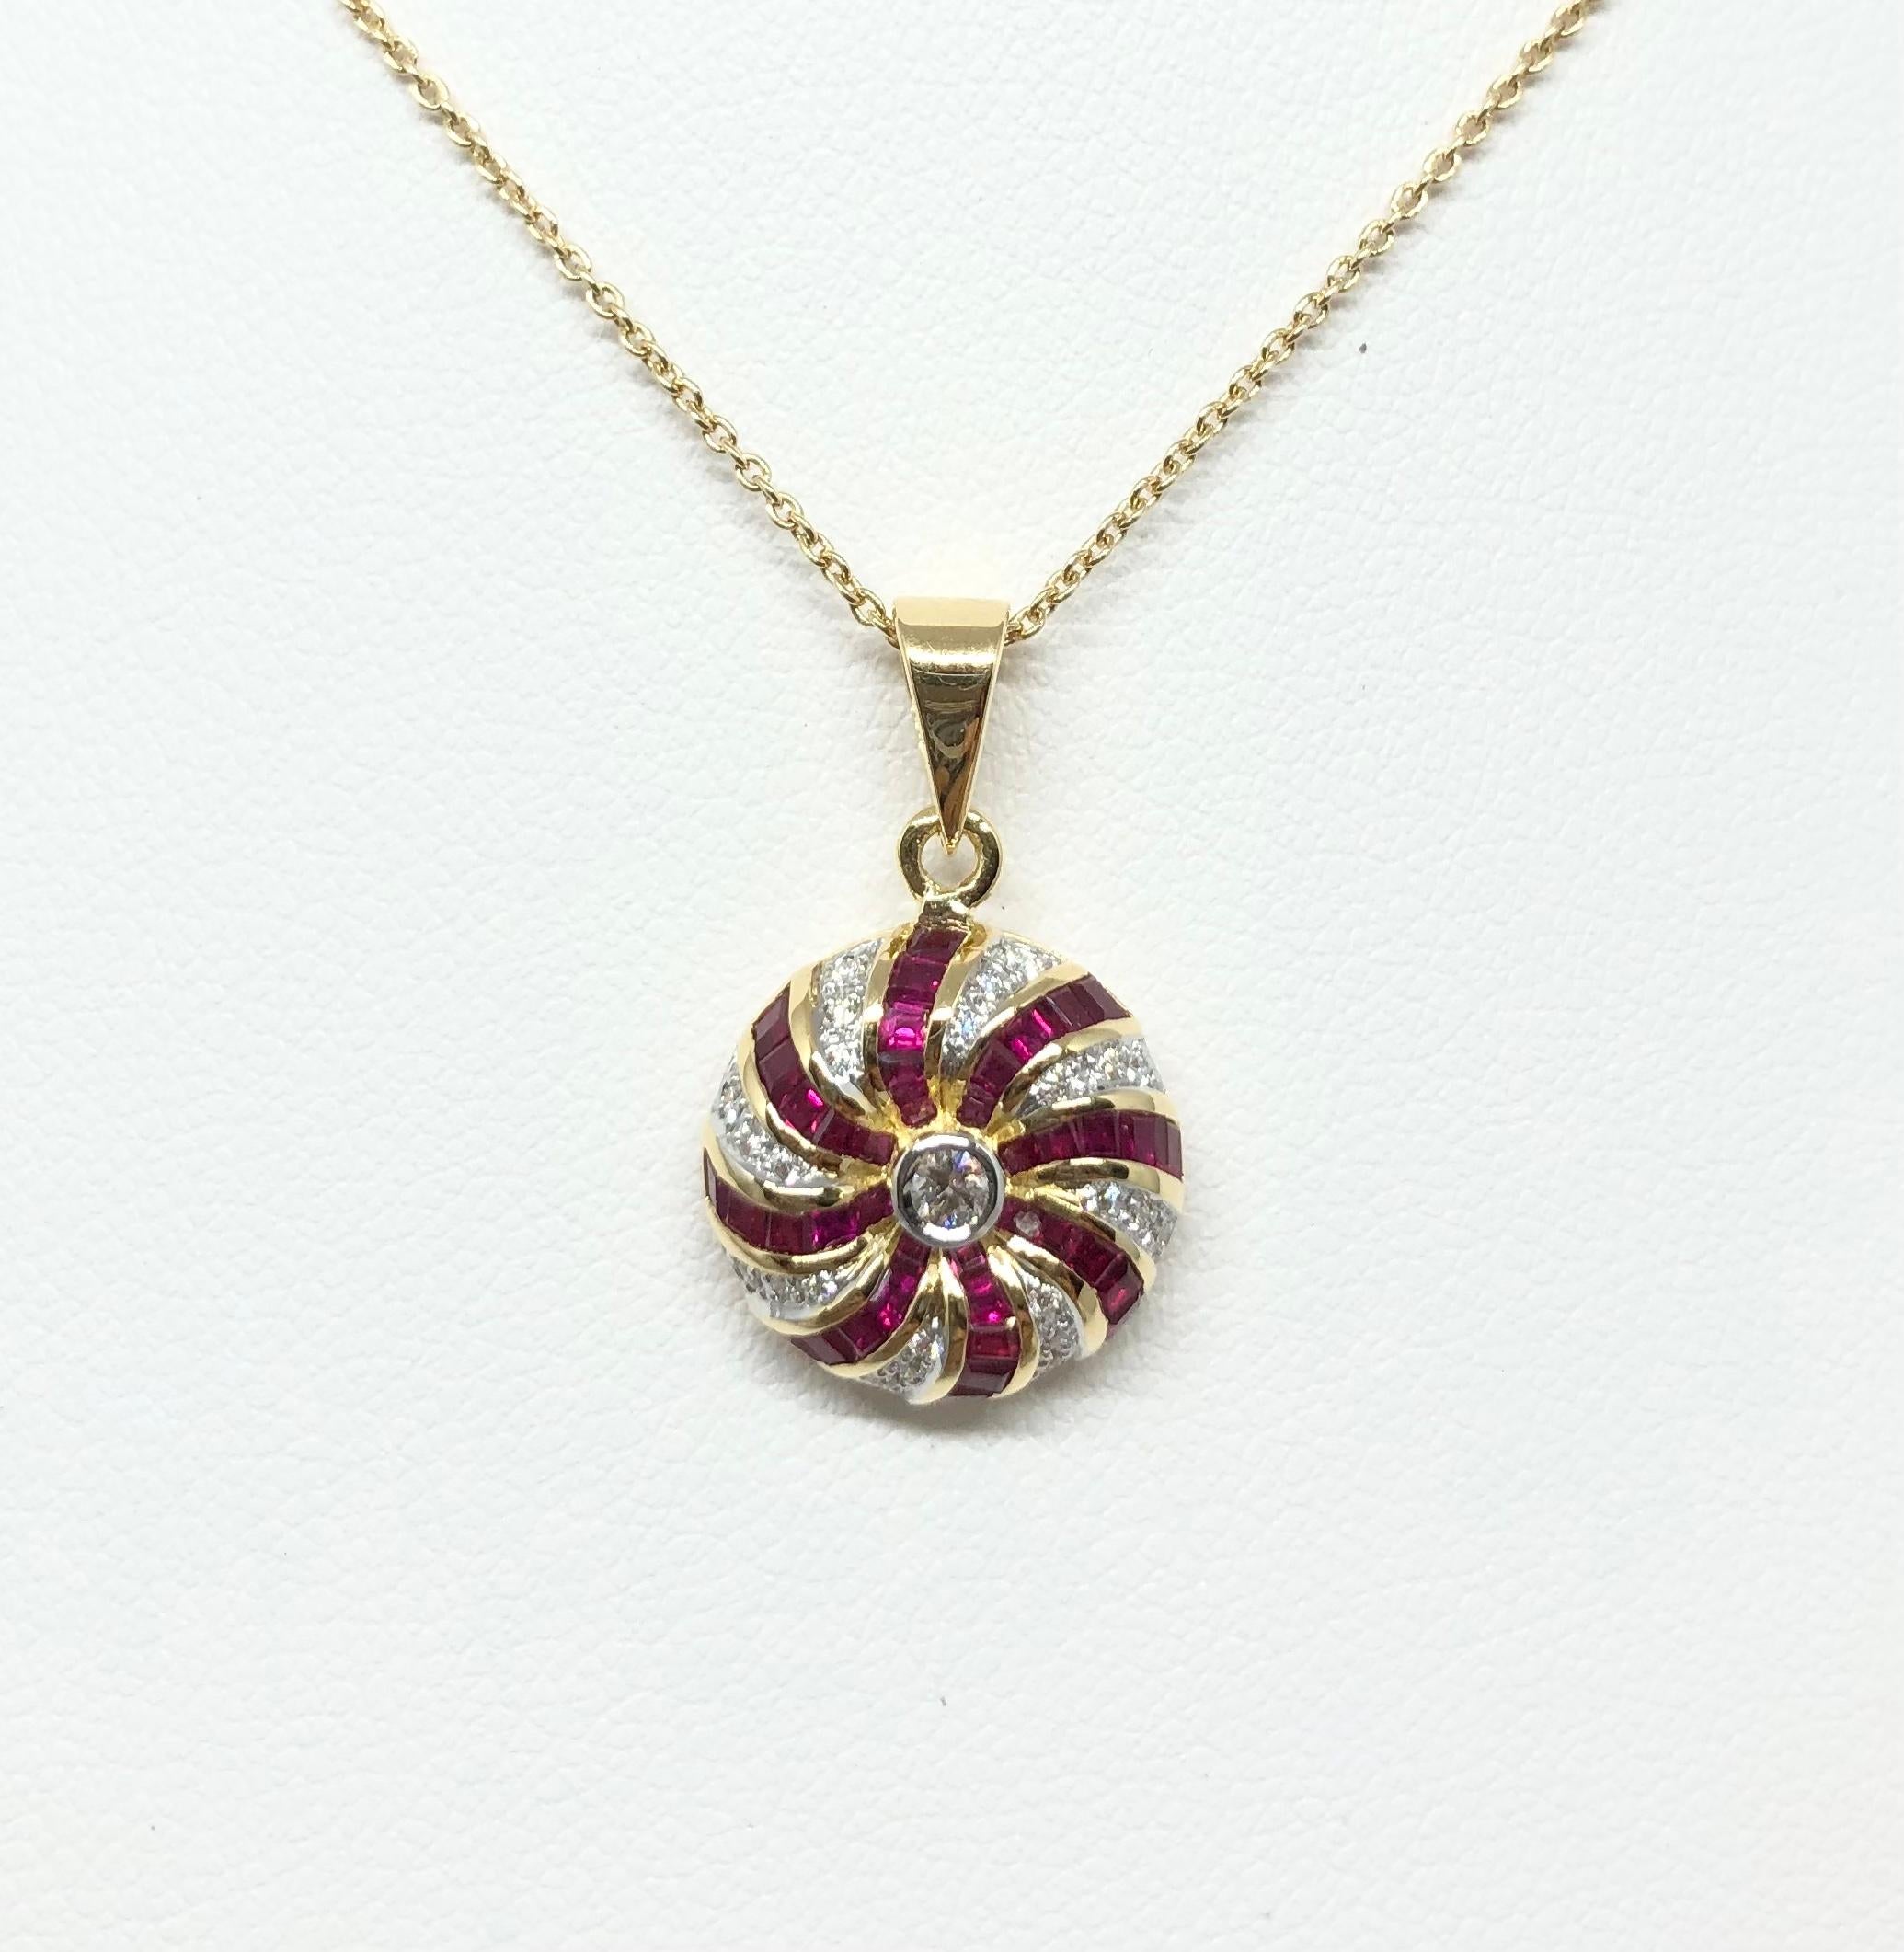 Ruby 1.10 carats with Diamond 0.03 carat Pendant set in 18 Karat Gold Settings
(chain not included)

Width: 1.4 cm 
Length: 2.1 cm
Total Weight: 2.94 grams

